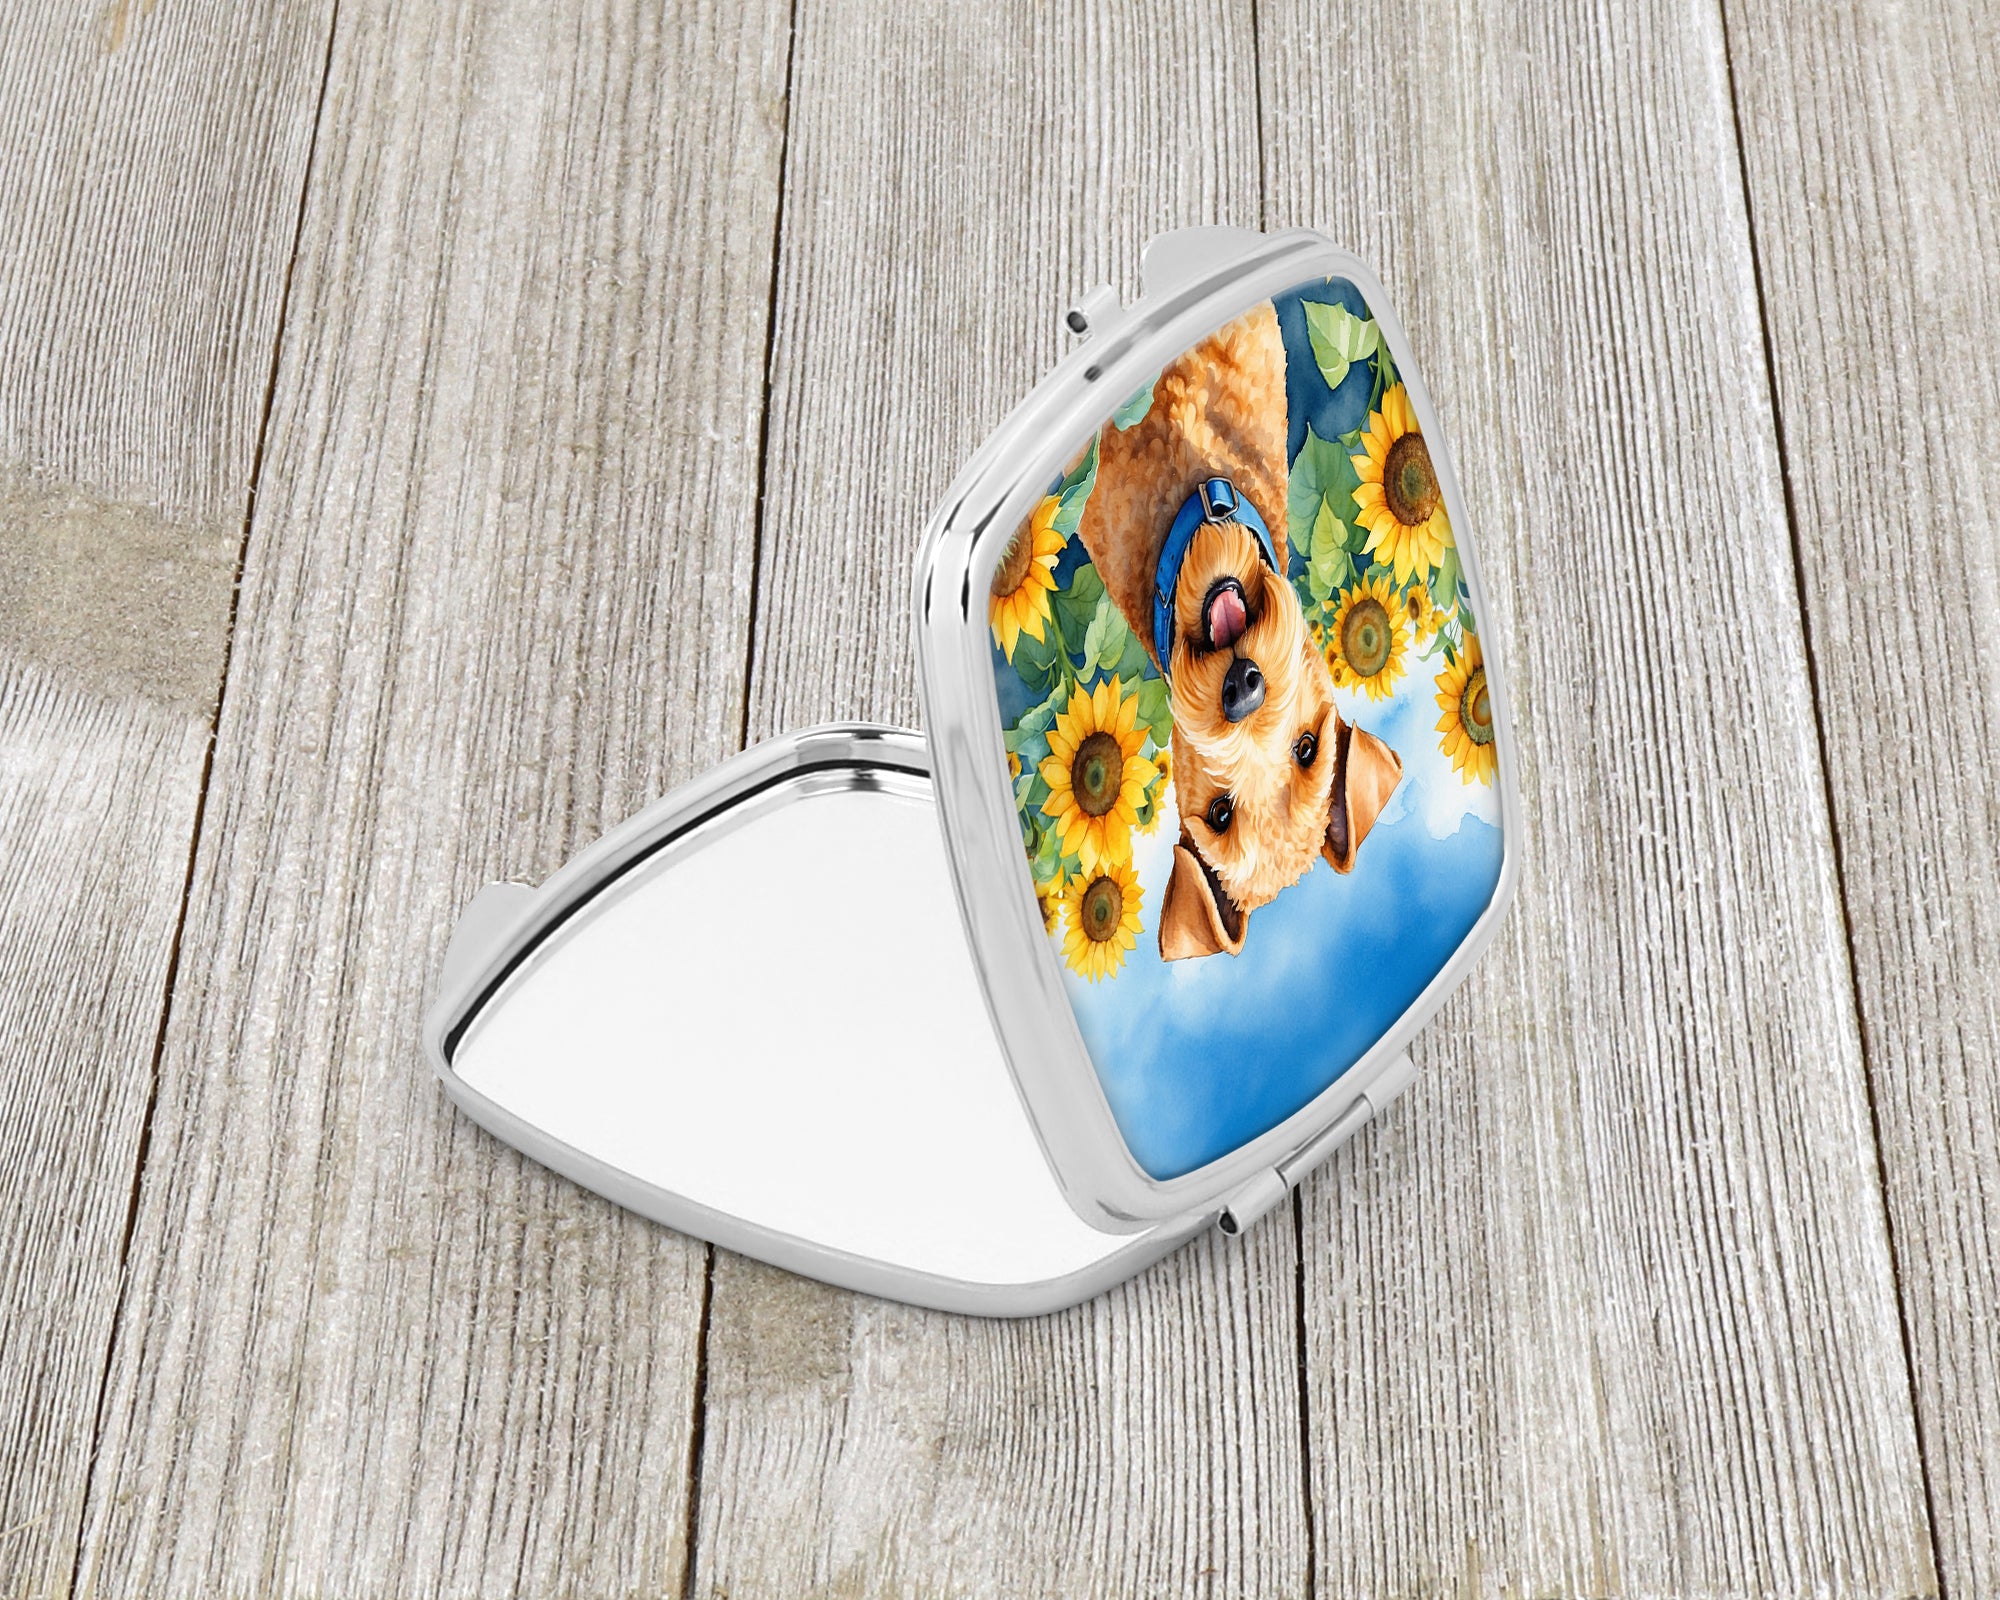 Buy this Lakeland Terrier in Sunflowers Compact Mirror